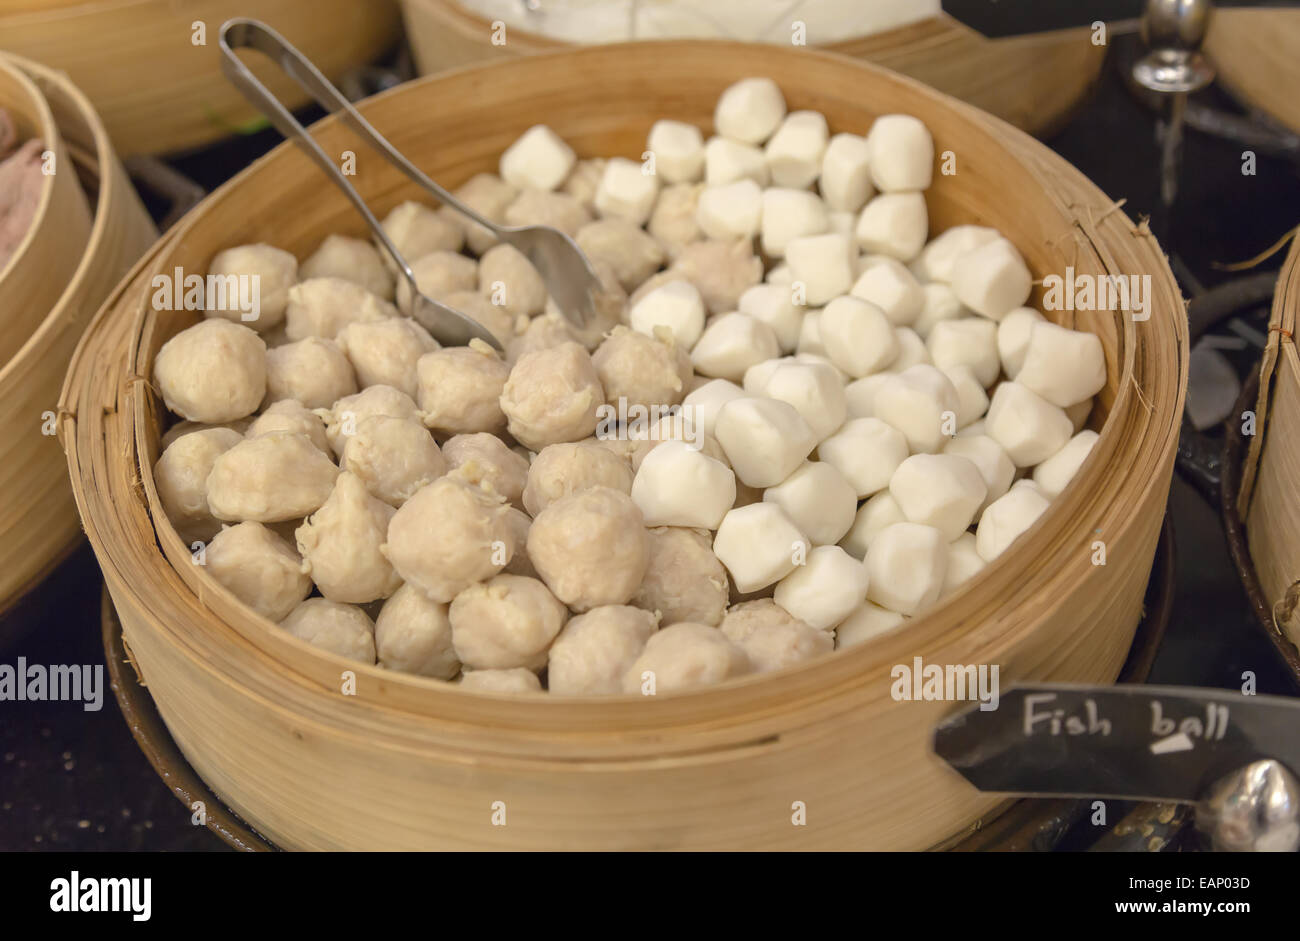 Fish Balls in a Basket Stock Photo